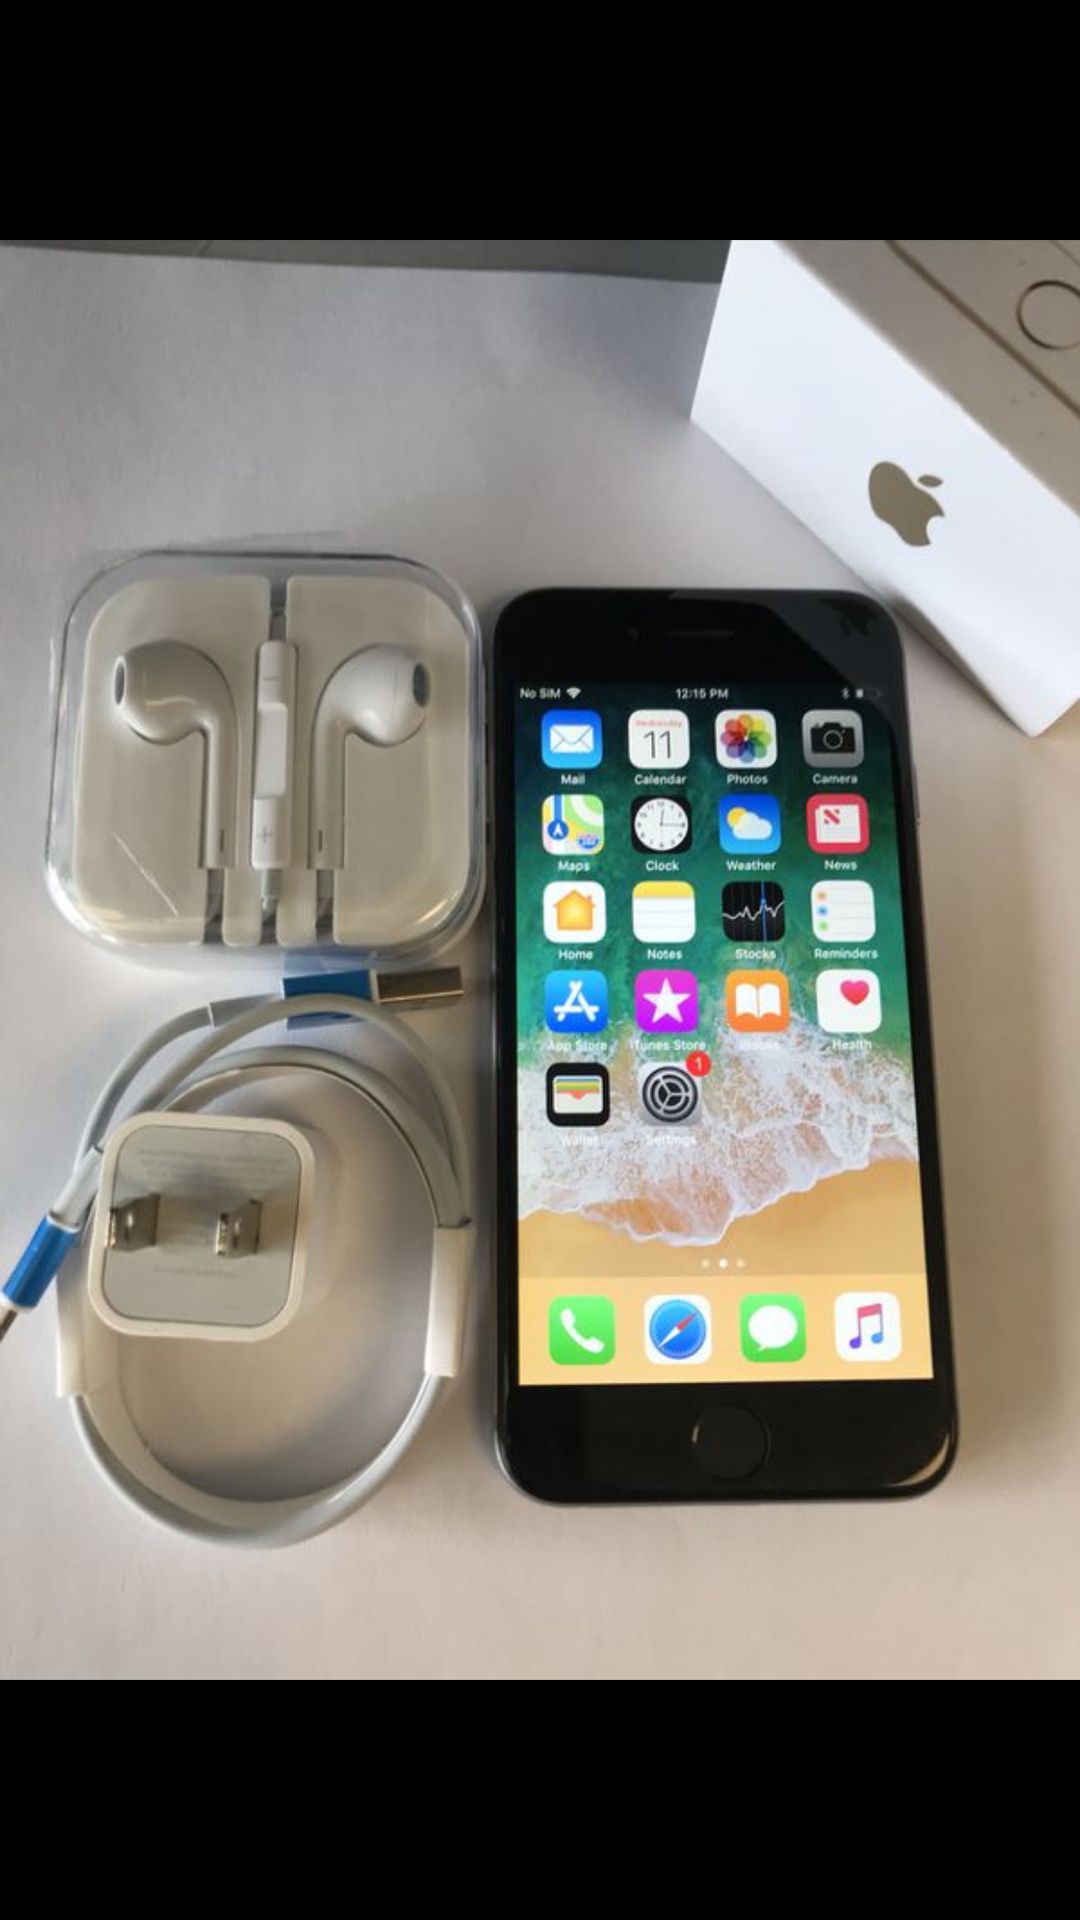 iPhone 6 64GB excellent condition factory Unlocked